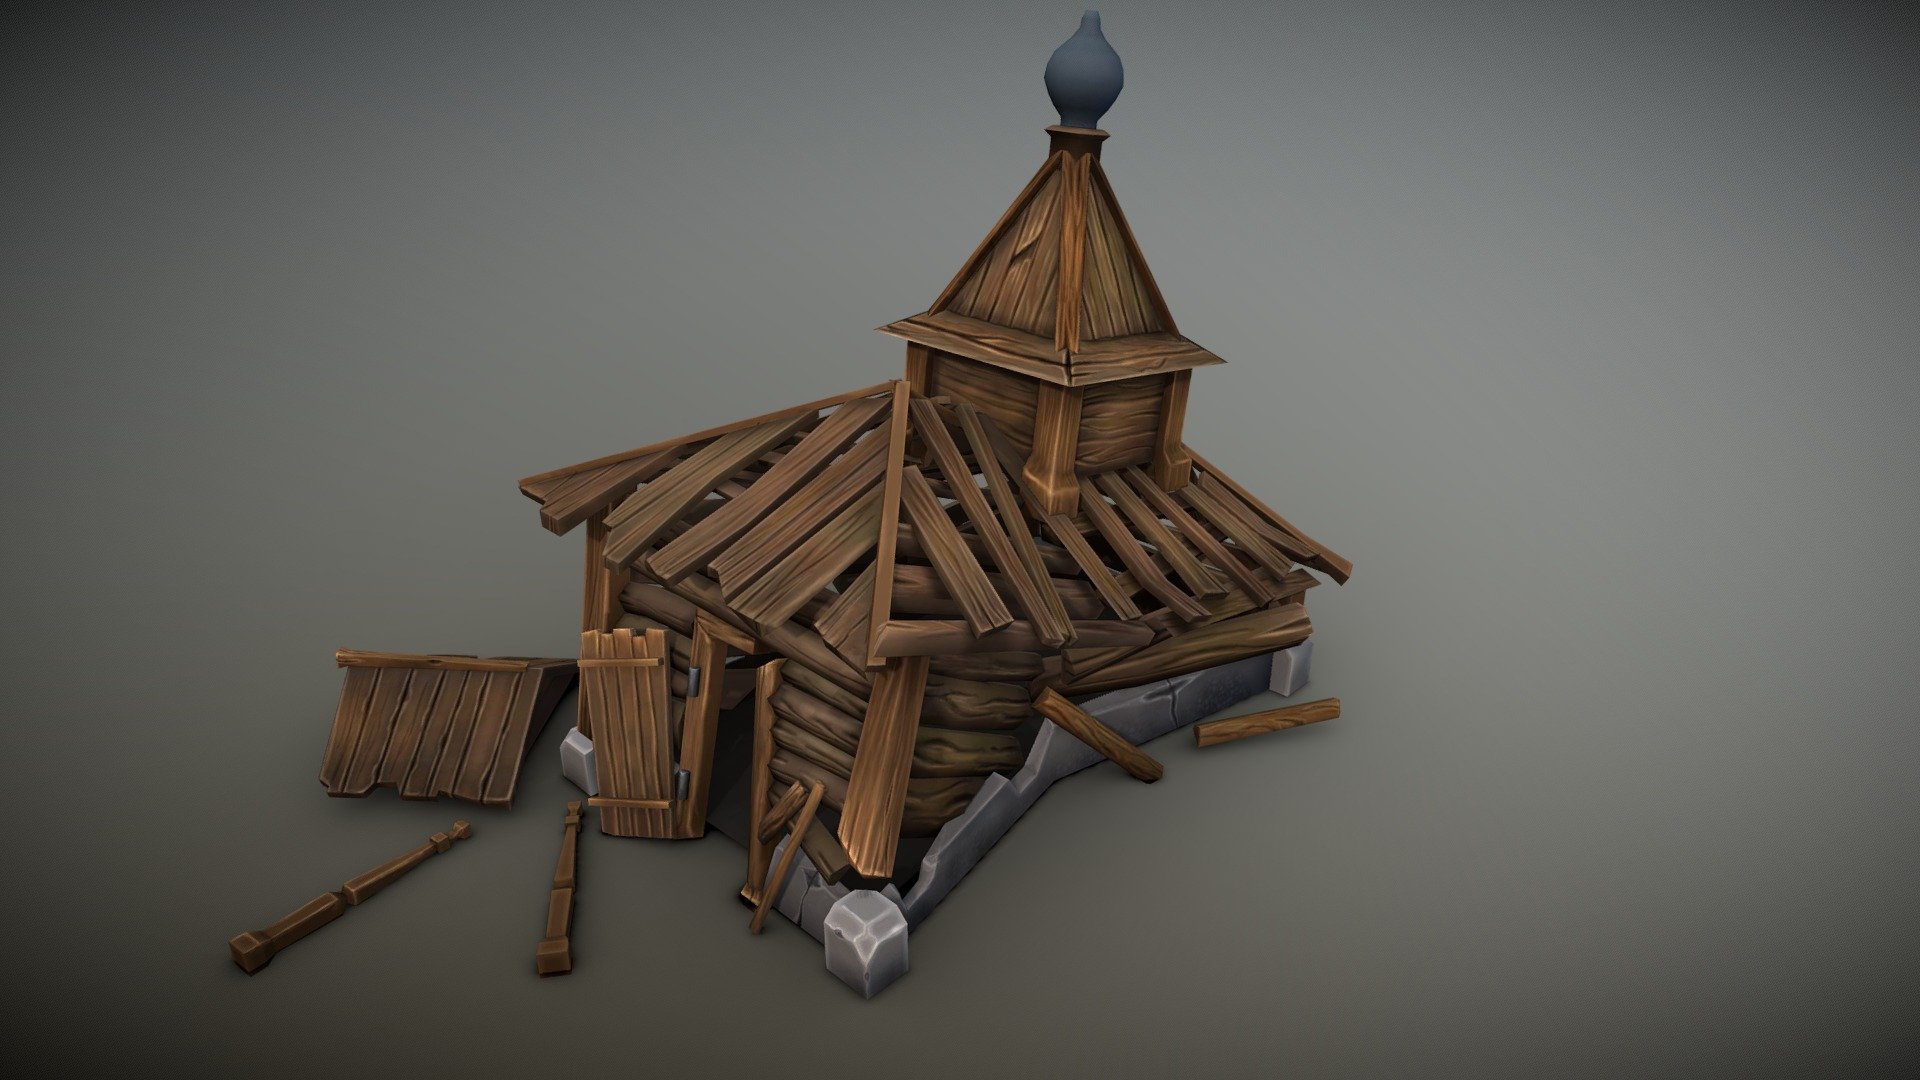 Model for the mobile game Treasure Hunter.
Finish painting was in a blender/ - Church, chapel, kirk - 3D model by LowPoly89 (@omega3) 3d model